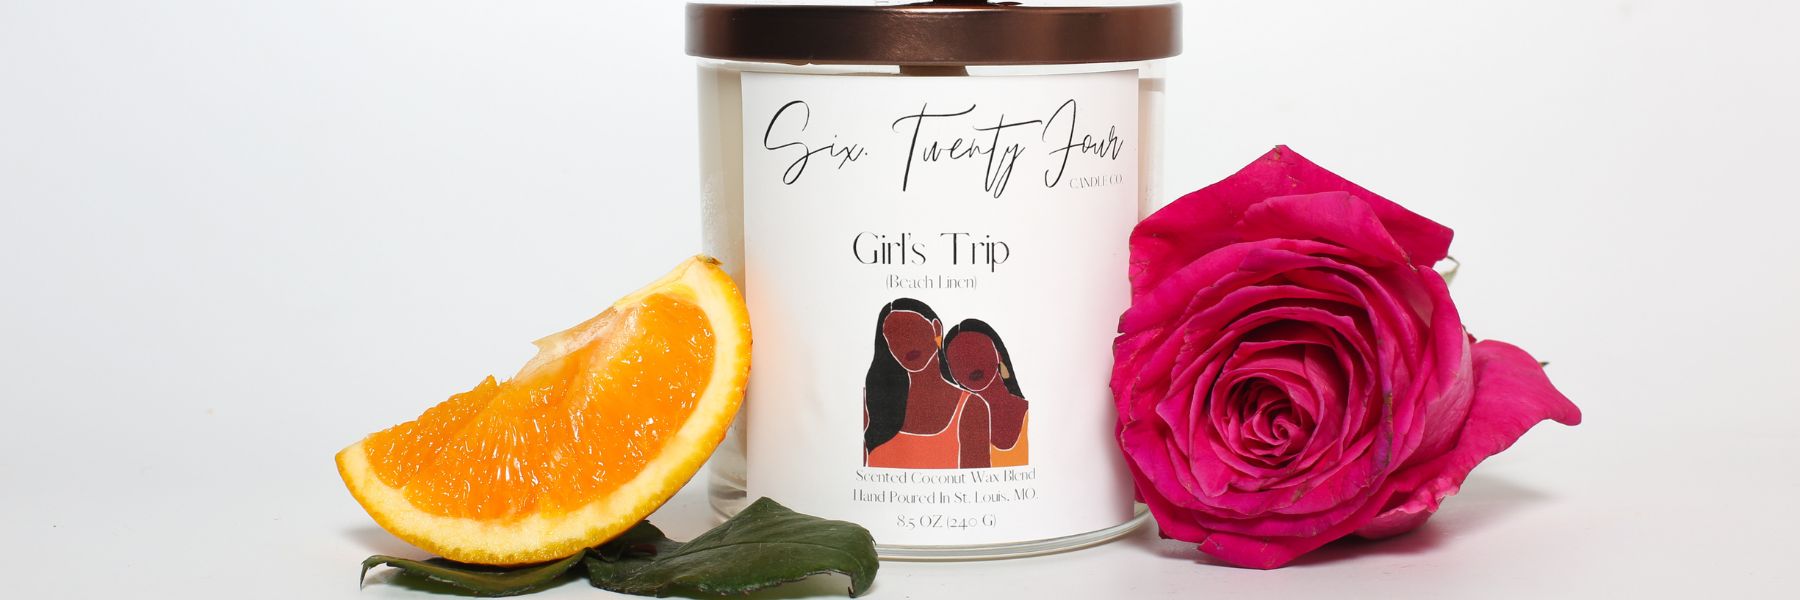 Girl's Trip is one of the candles by Six.Twenty Four Candle Co. in St. Louis.